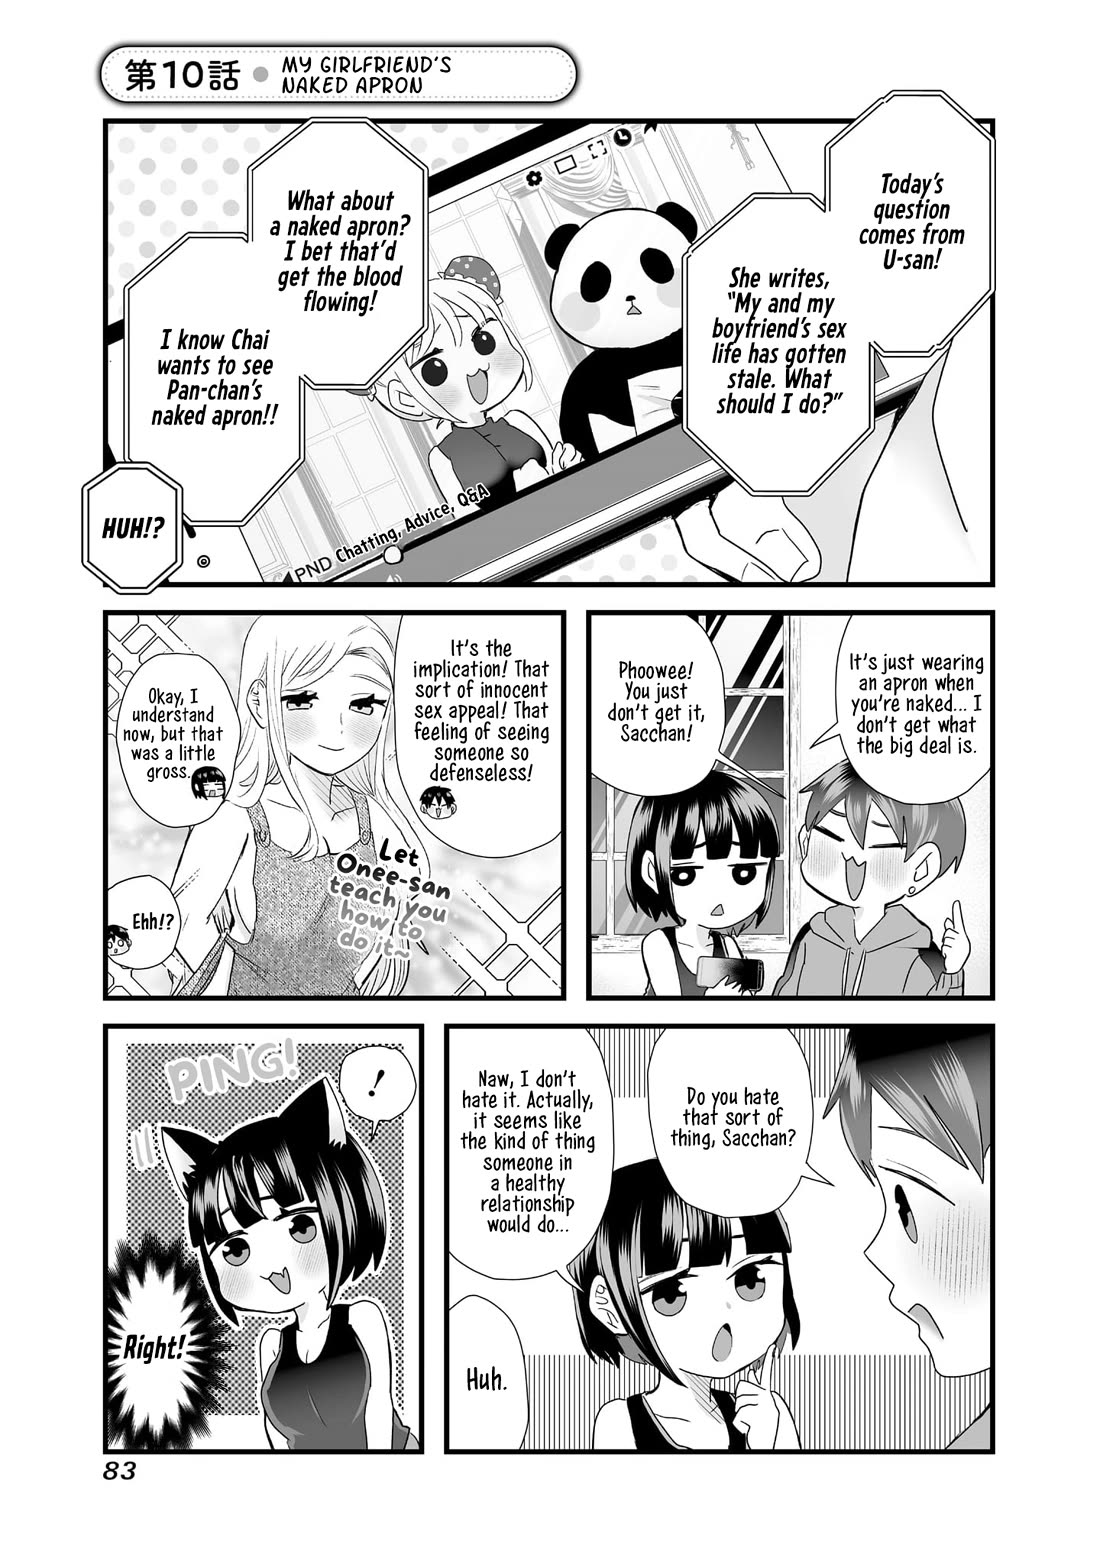 Sacchan and Ken-chan Are Going at it Again - chapter 10 - #1